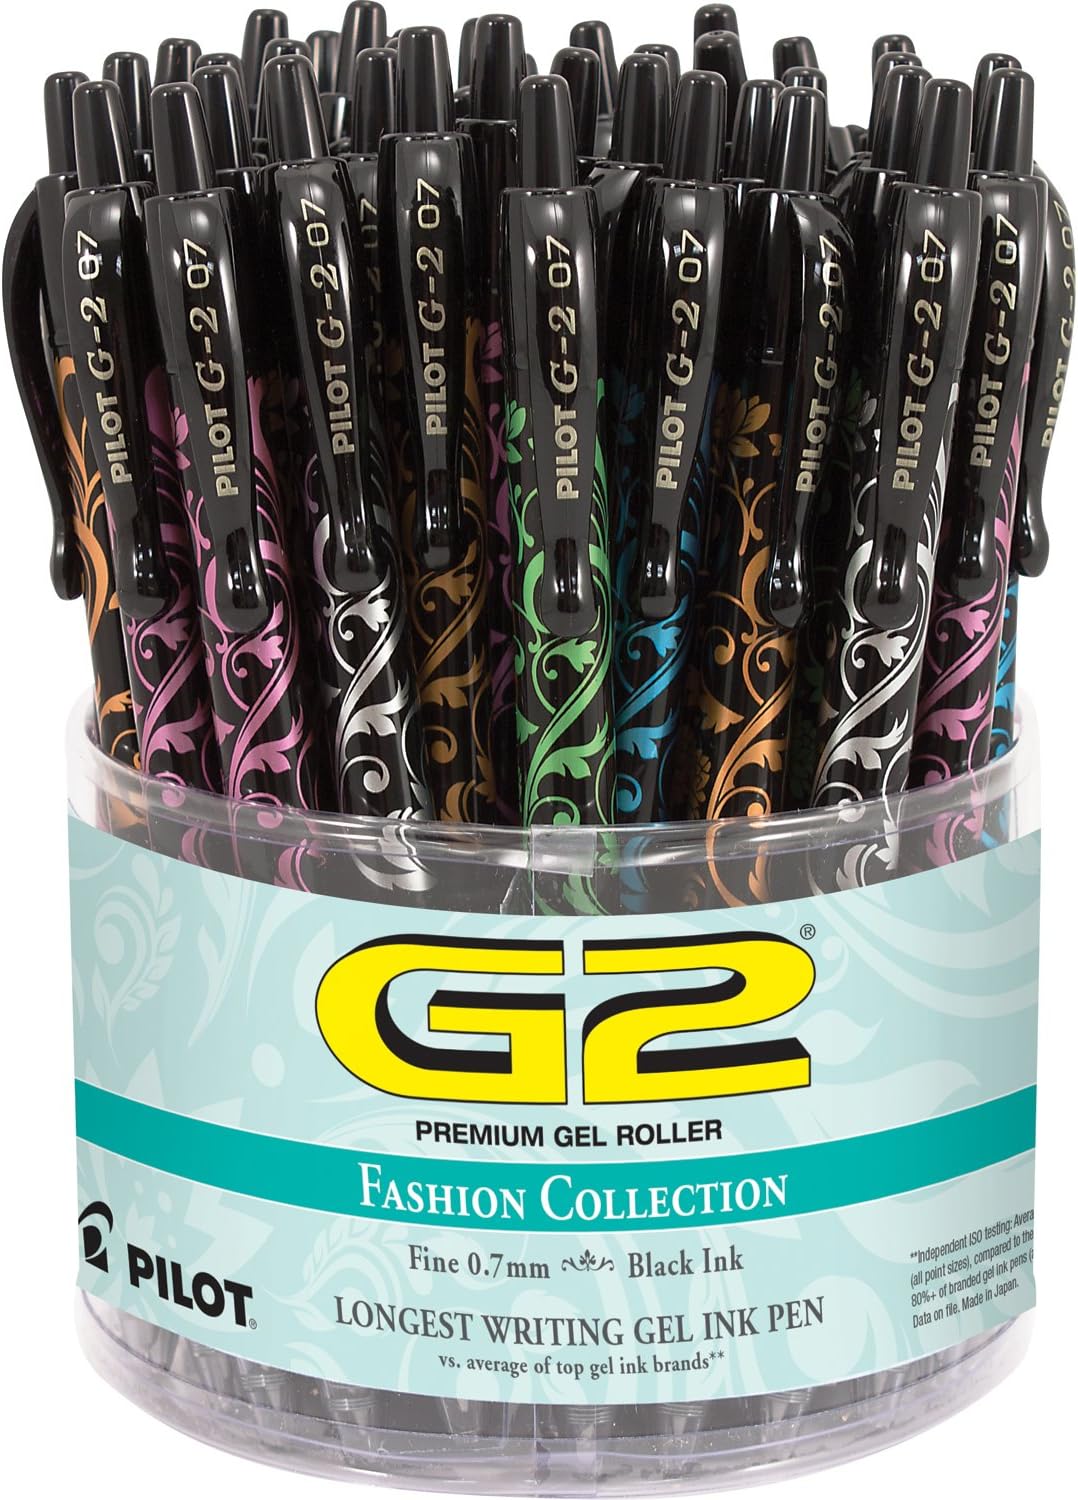 PILOT G2 Fashion Collection Colors Refillable & Retractable Rolling Ball Gel Pens, Fine Point, Assorted Color Barrel Designs, Black Ink, 48-Pack Tub (5797)